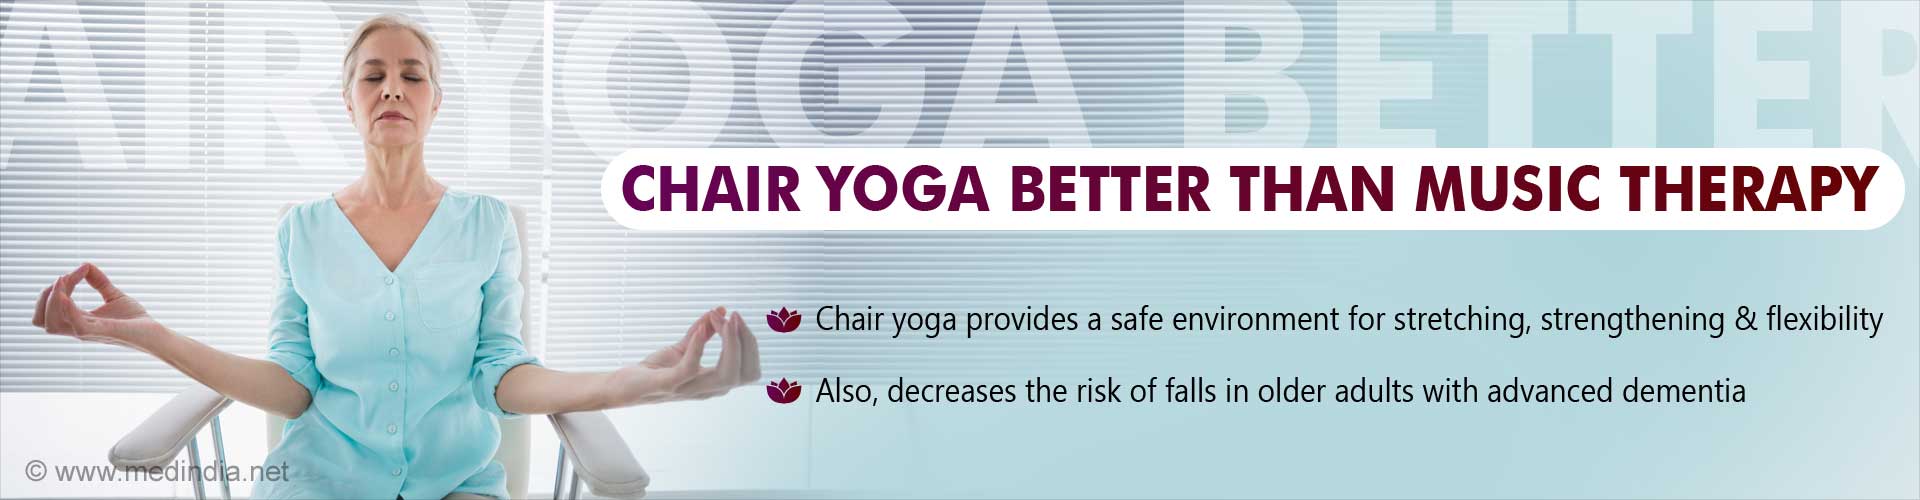 Chair yoga better than music therapy. Chair yoga provides a safe environment for stretching, strengthening and flexibility. Also, decreases the risk of falls in older adults with advanced dementia.
